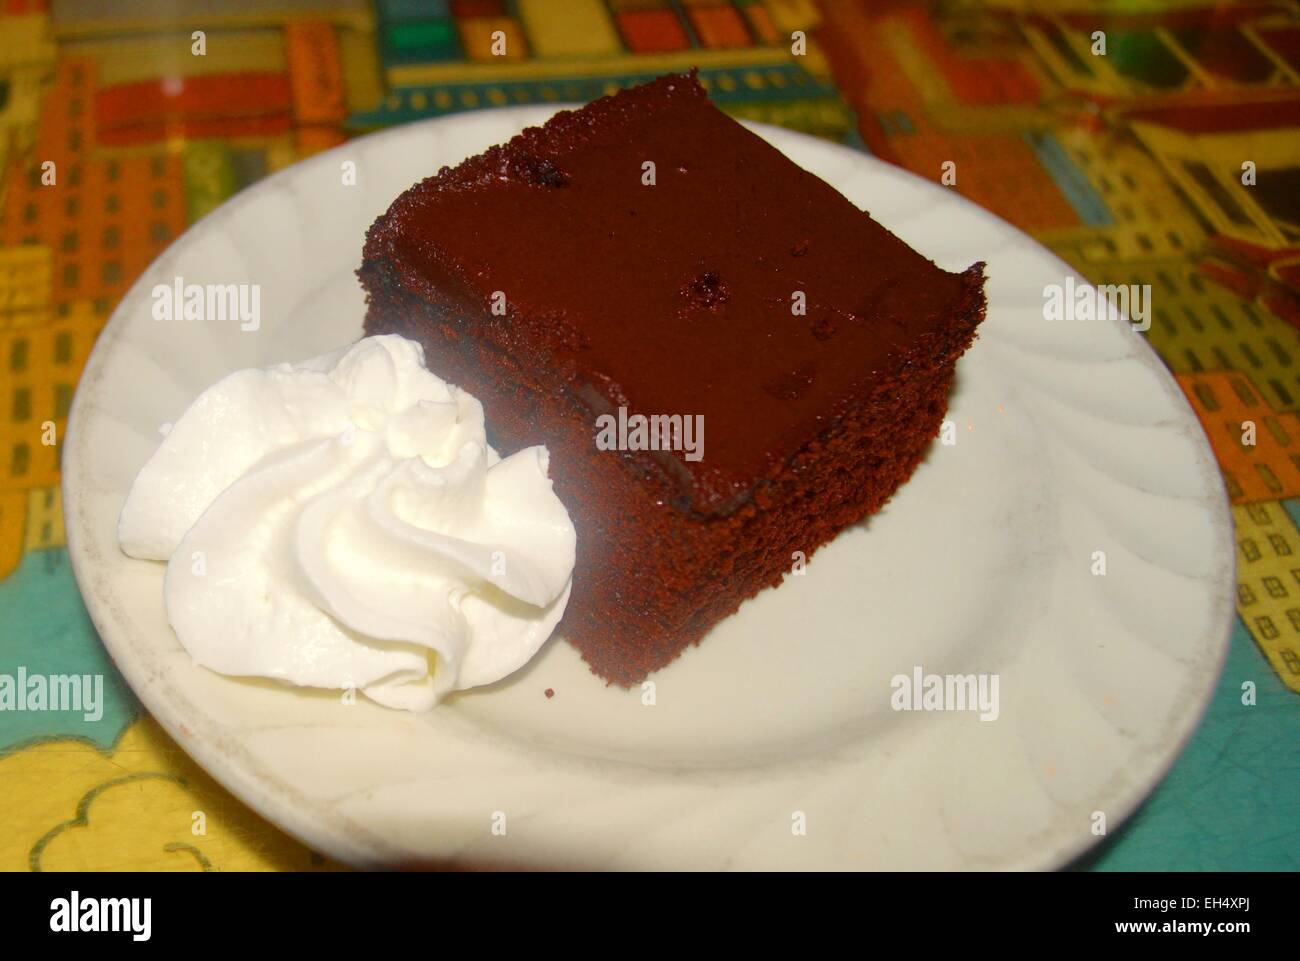 Scrumptious chocolate cake with whipped cream Stock Photo